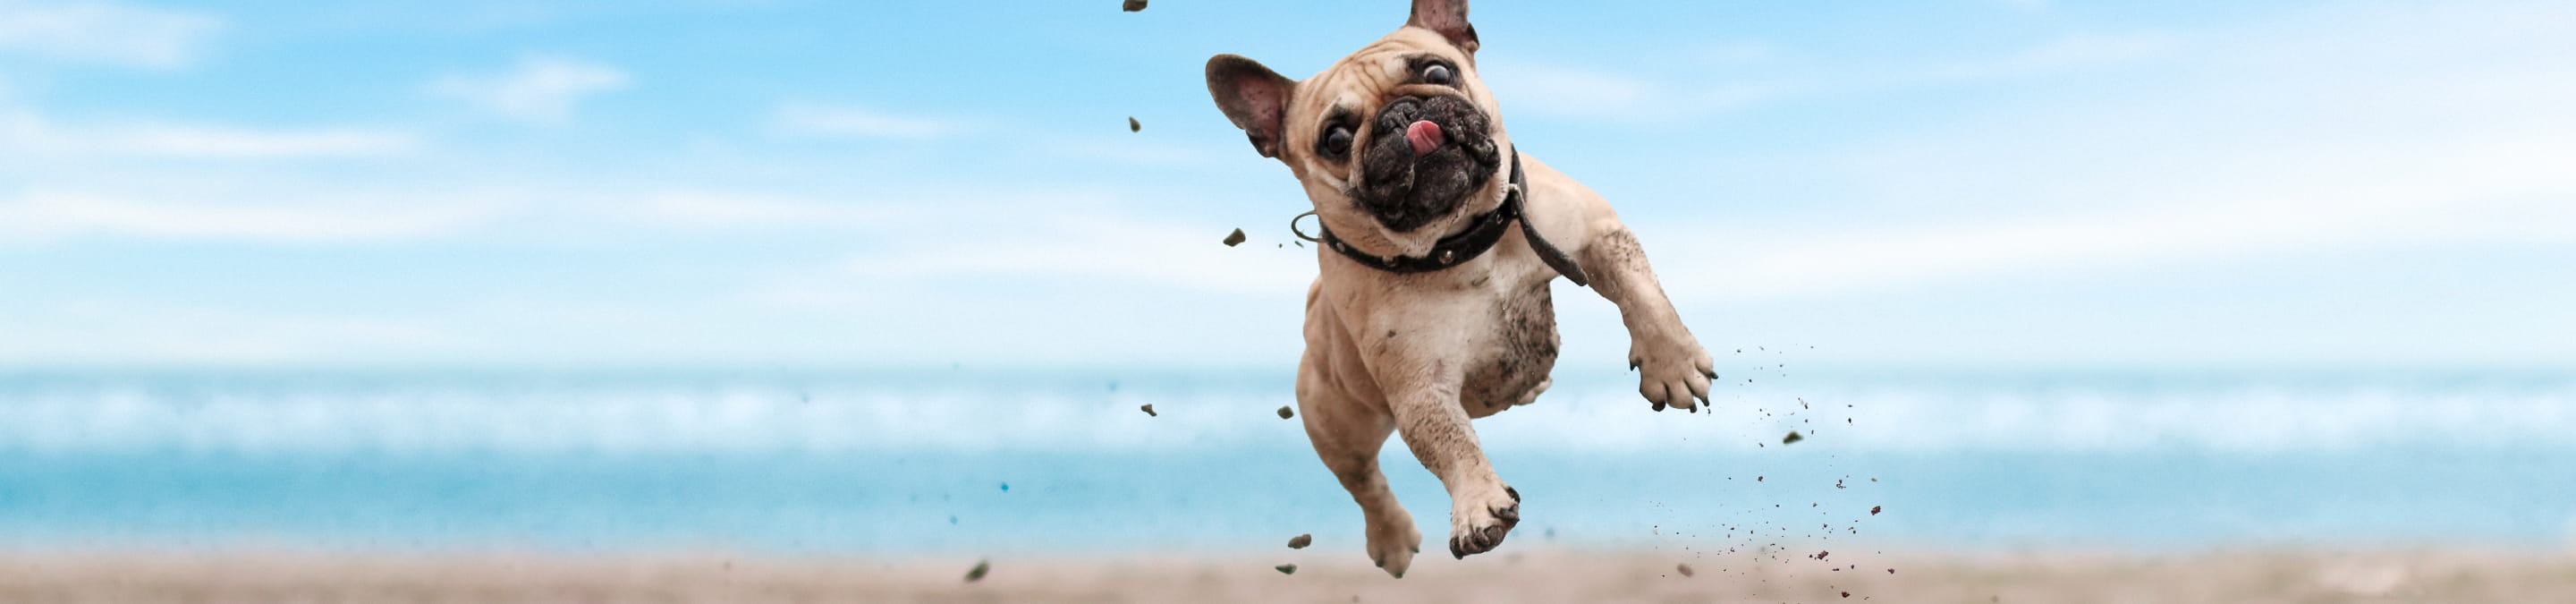 a dog jumping in the air on a beach